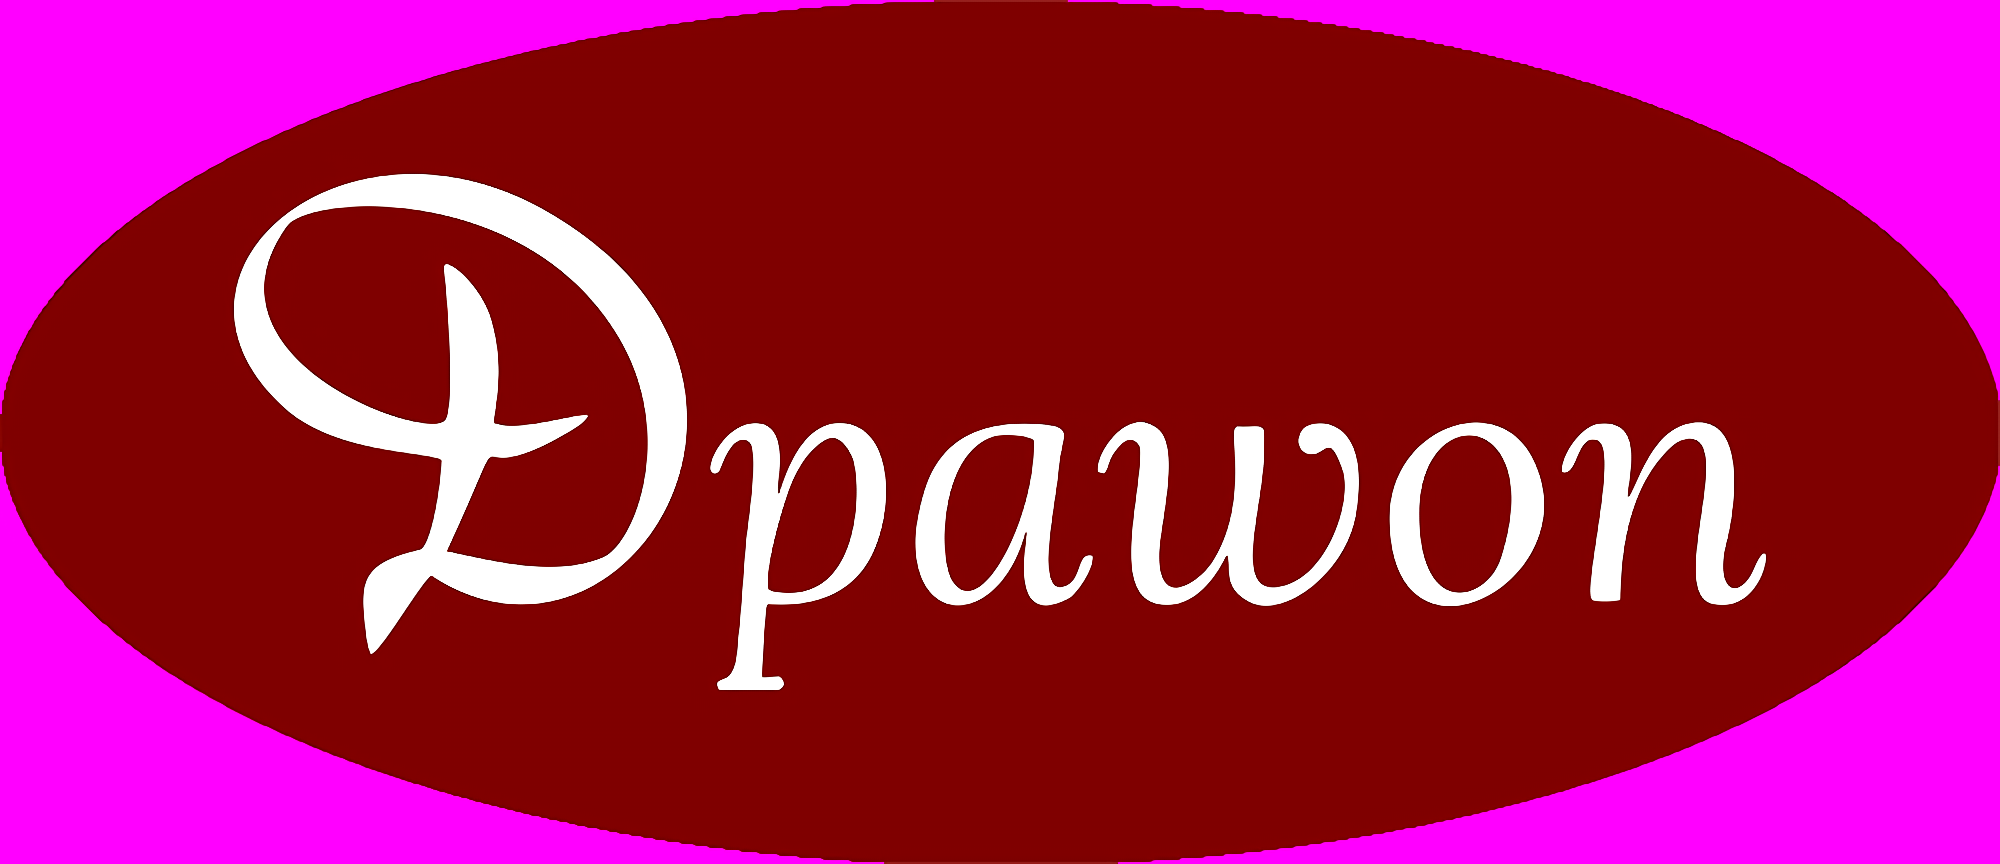 D'pawon Catering